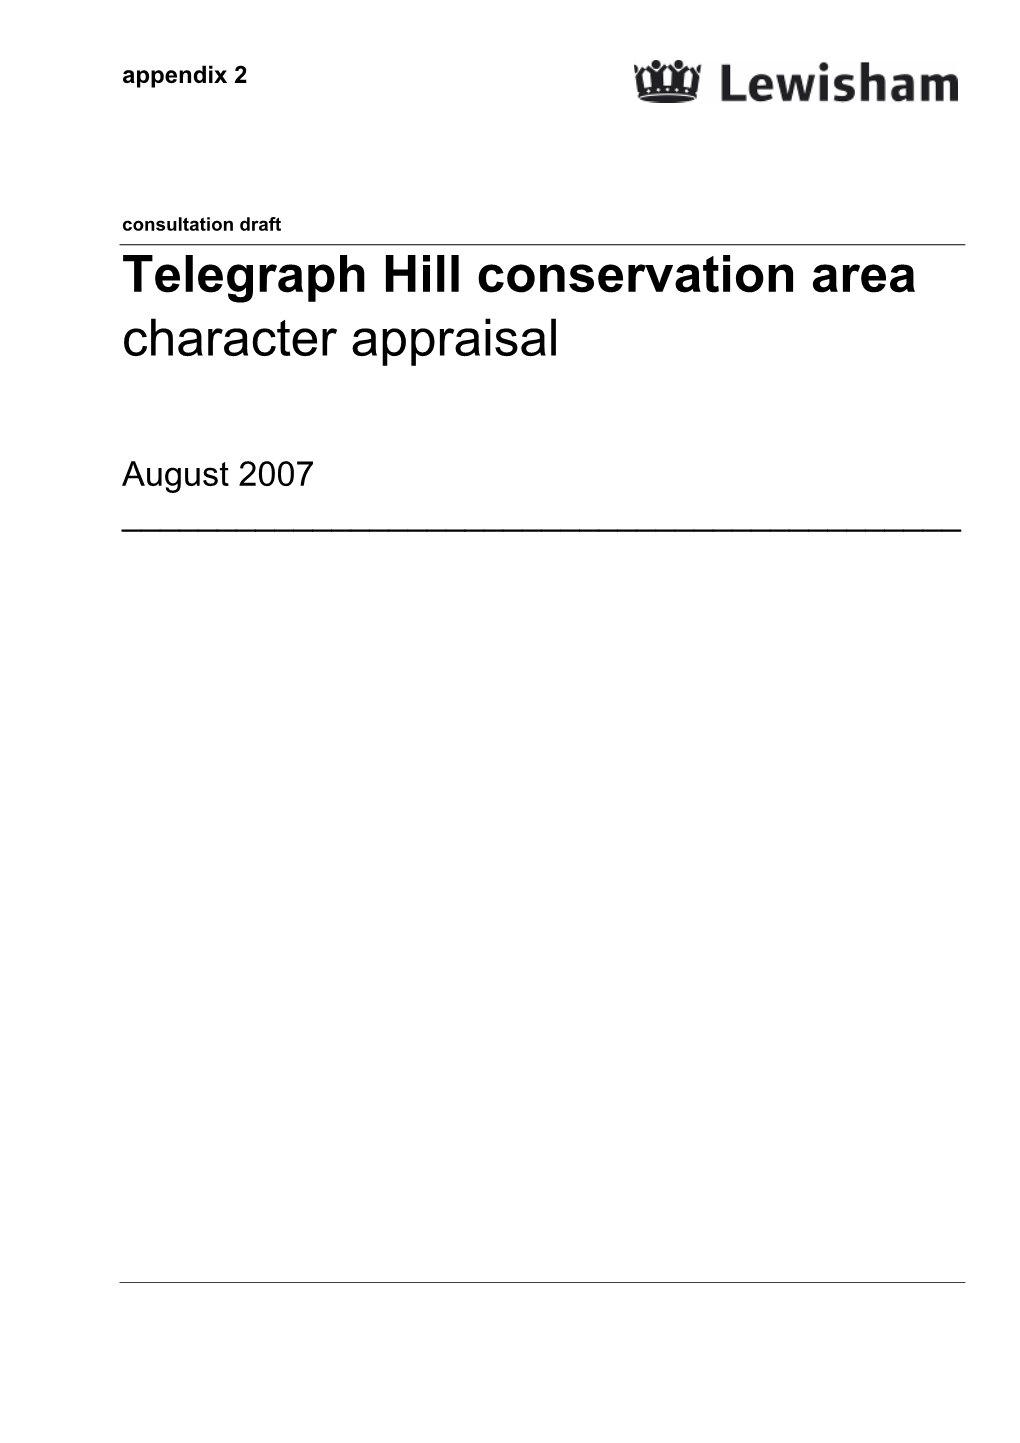 Telegraph Hill Conservation Area Character Appraisal